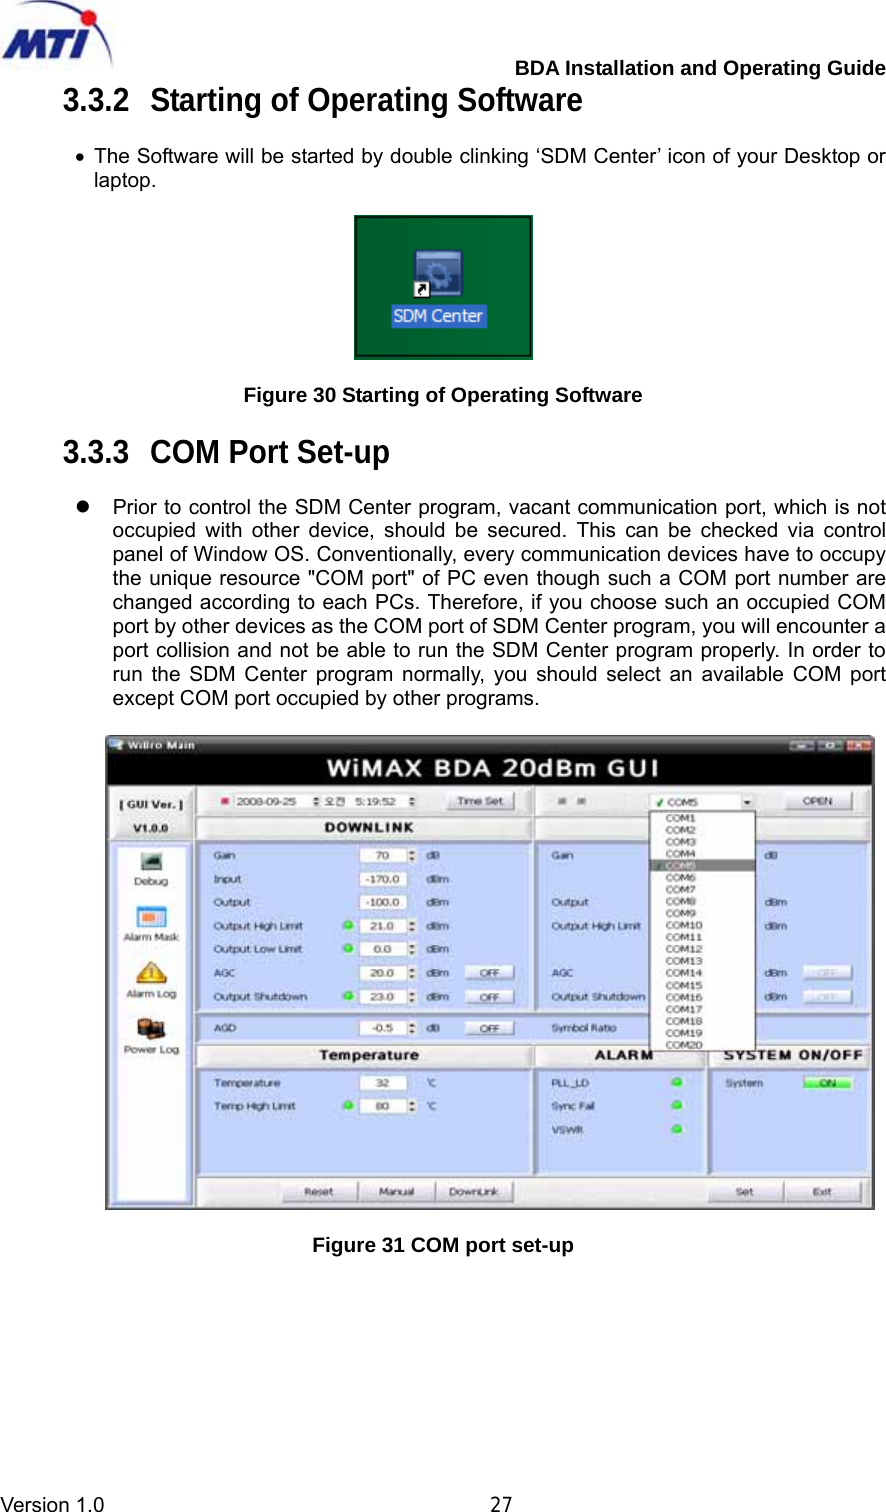         BDA Installation and Operating Guide Version 1.0                                       27 3.3.2  Starting of Operating Software  • The Software will be started by double clinking ‘SDM Center’ icon of your Desktop or laptop.    Figure 30 Starting of Operating Software  3.3.3  COM Port Set-up  z  Prior to control the SDM Center program, vacant communication port, which is not occupied with other device, should be secured. This can be checked via control panel of Window OS. Conventionally, every communication devices have to occupy the unique resource &quot;COM port&quot; of PC even though such a COM port number are changed according to each PCs. Therefore, if you choose such an occupied COM port by other devices as the COM port of SDM Center program, you will encounter a port collision and not be able to run the SDM Center program properly. In order to run the SDM Center program normally, you should select an available COM port except COM port occupied by other programs.    Figure 31 COM port set-up  